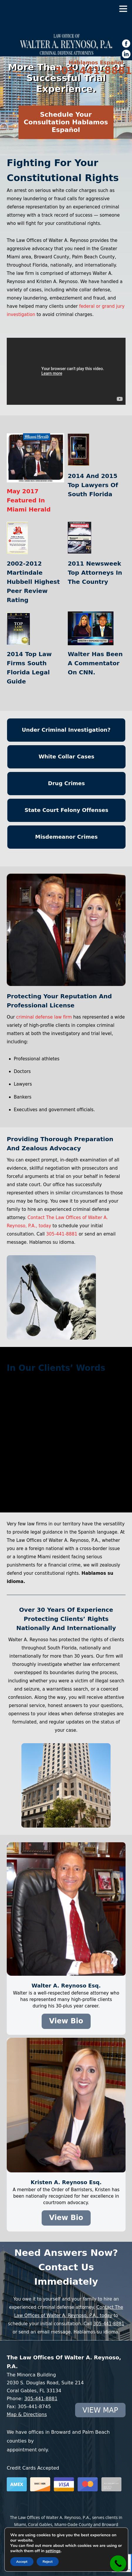 The Law Offices of Walter A. Reynoso, P.A. - Coral Gables FL Lawyers